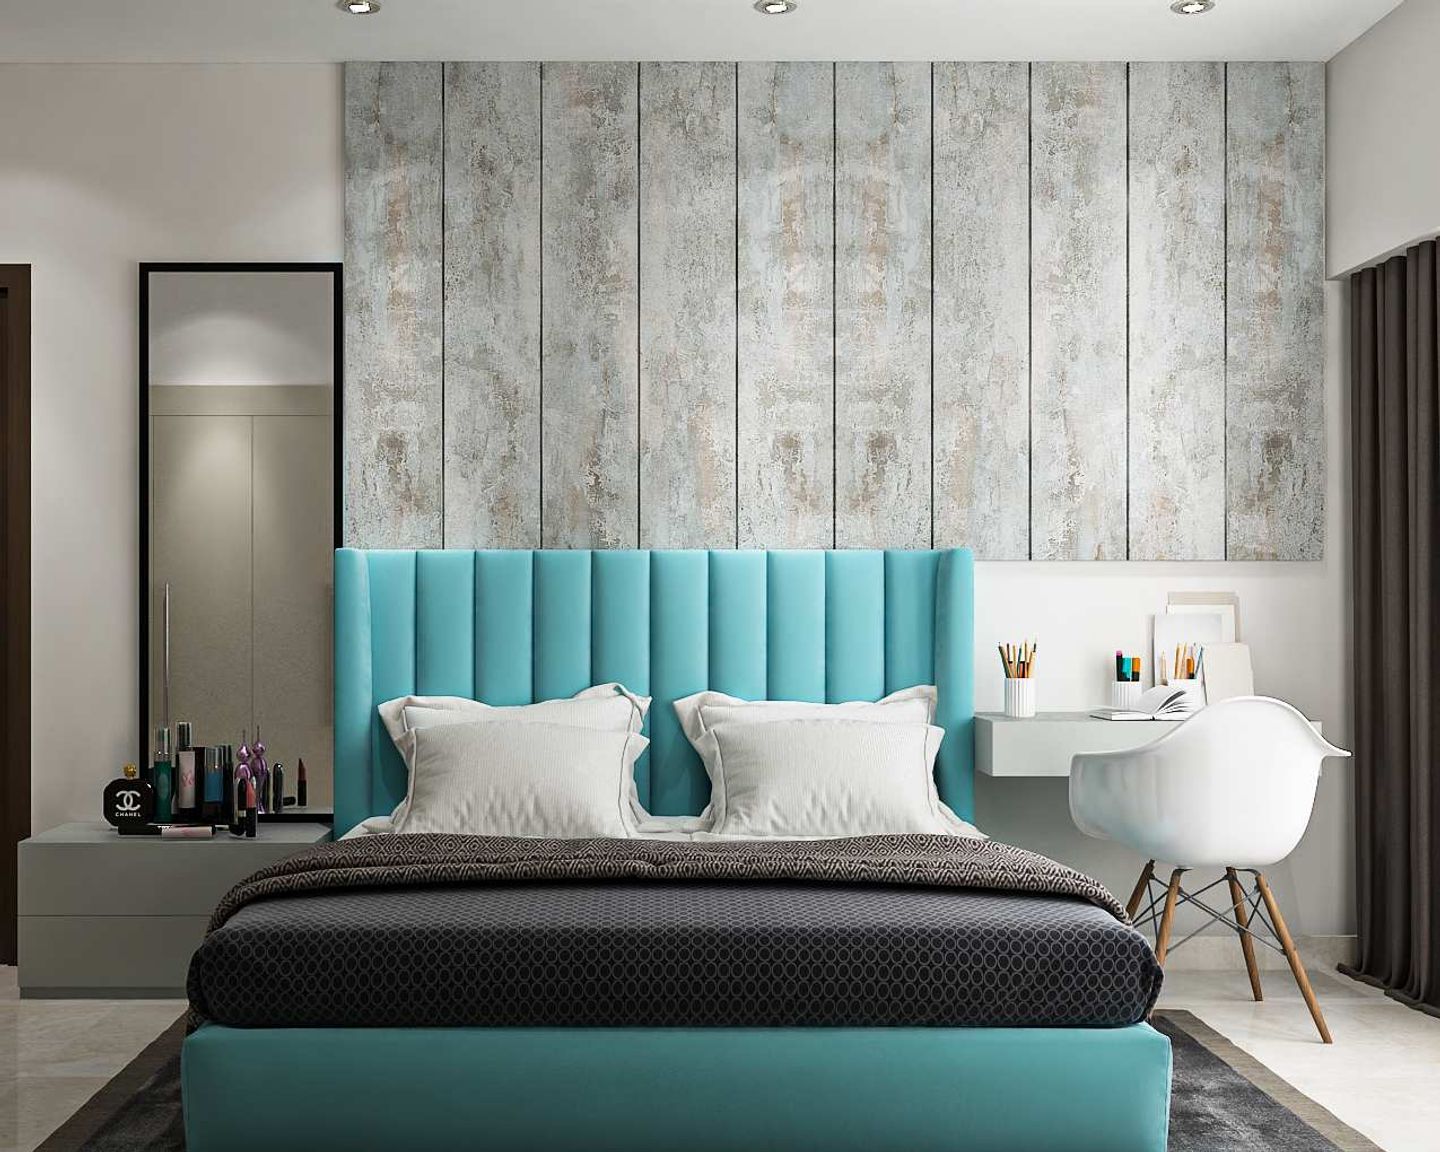 Modern Bedroom Wall Design With Wooden Rafters